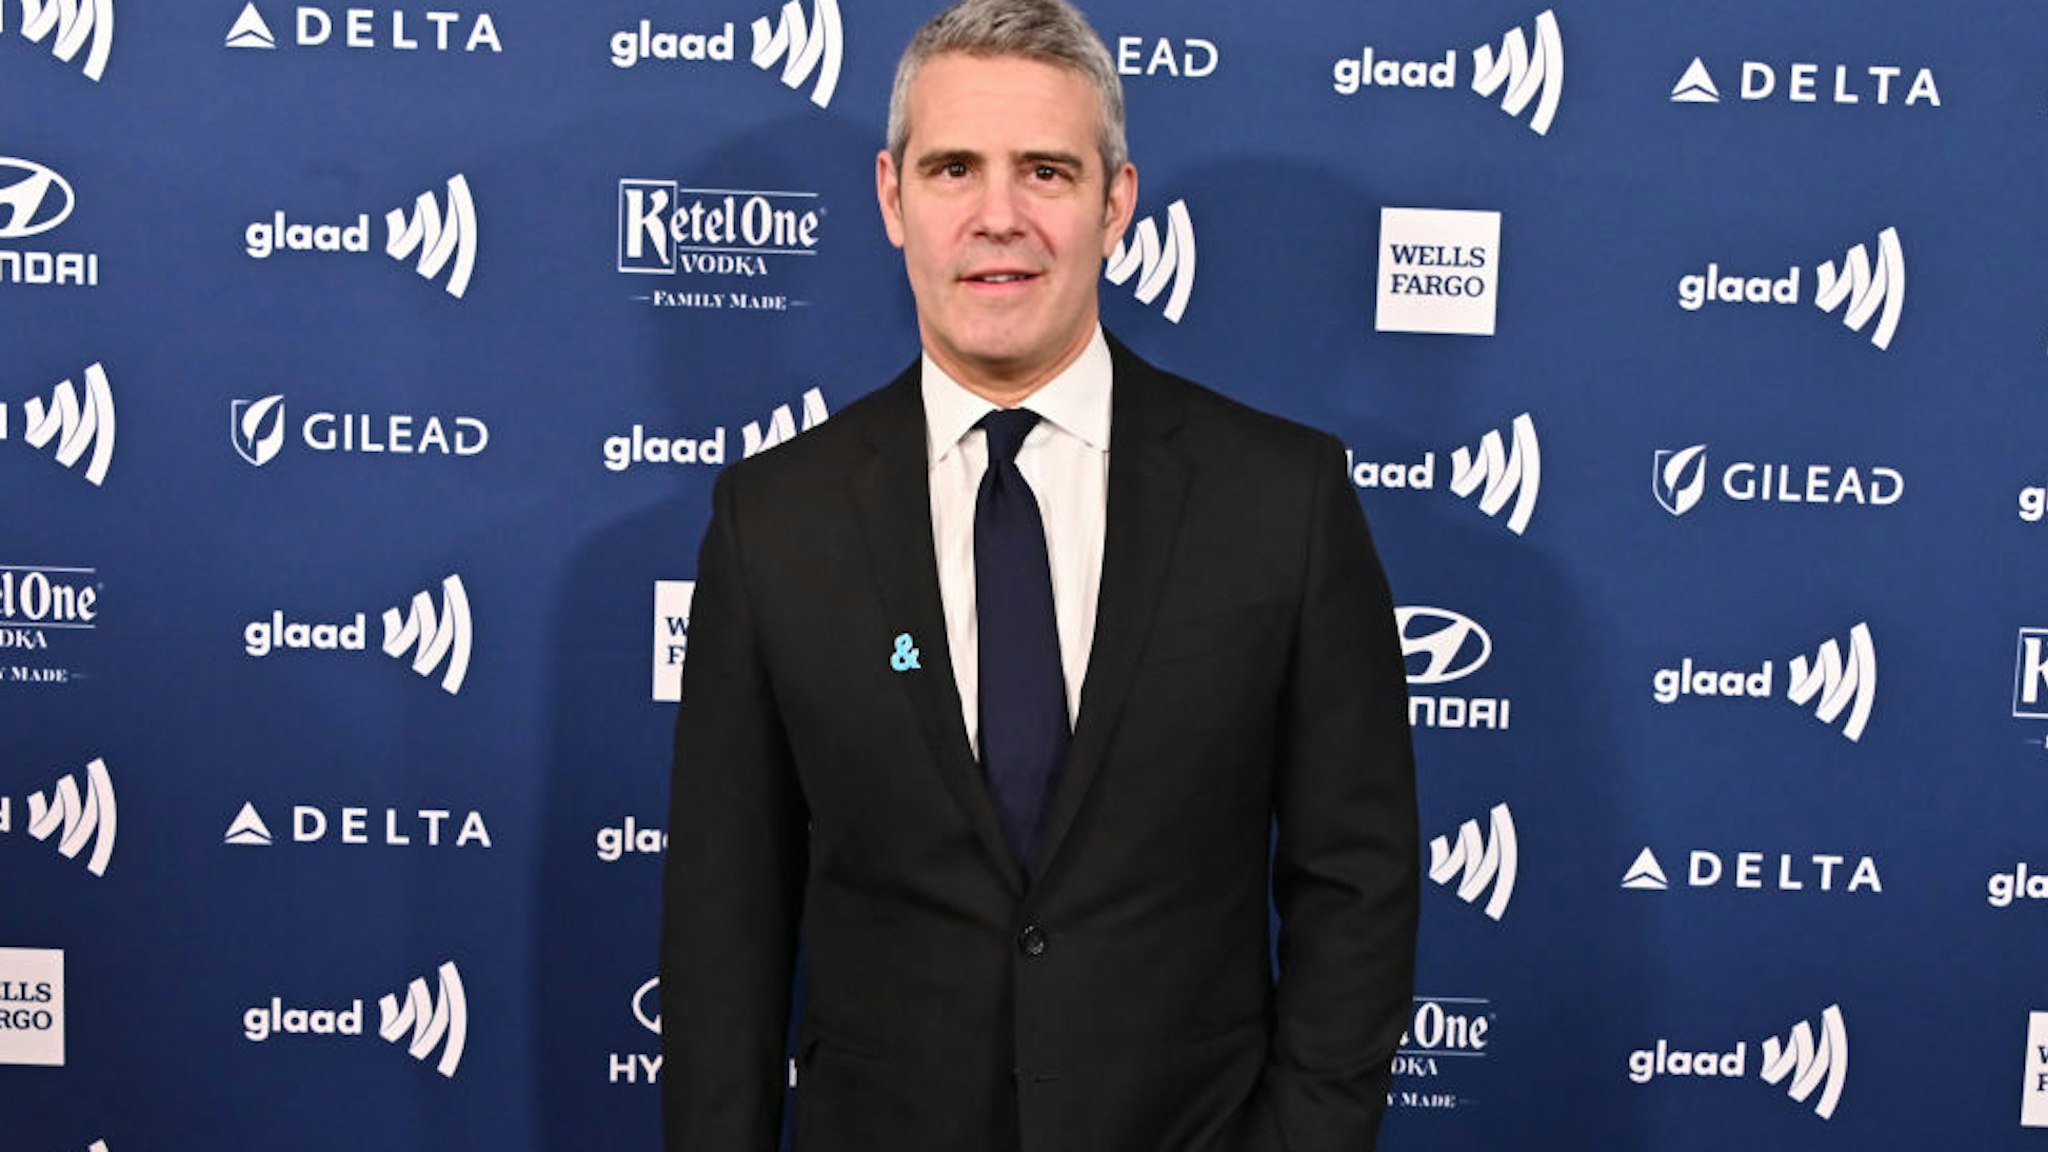 Andy Cohen attends the 30th Annual GLAAD Media Awards in partnership with Ketel One Family-Made Vodka, longstanding ally of the LGBTQ community on May 04, 2019 in New York City.